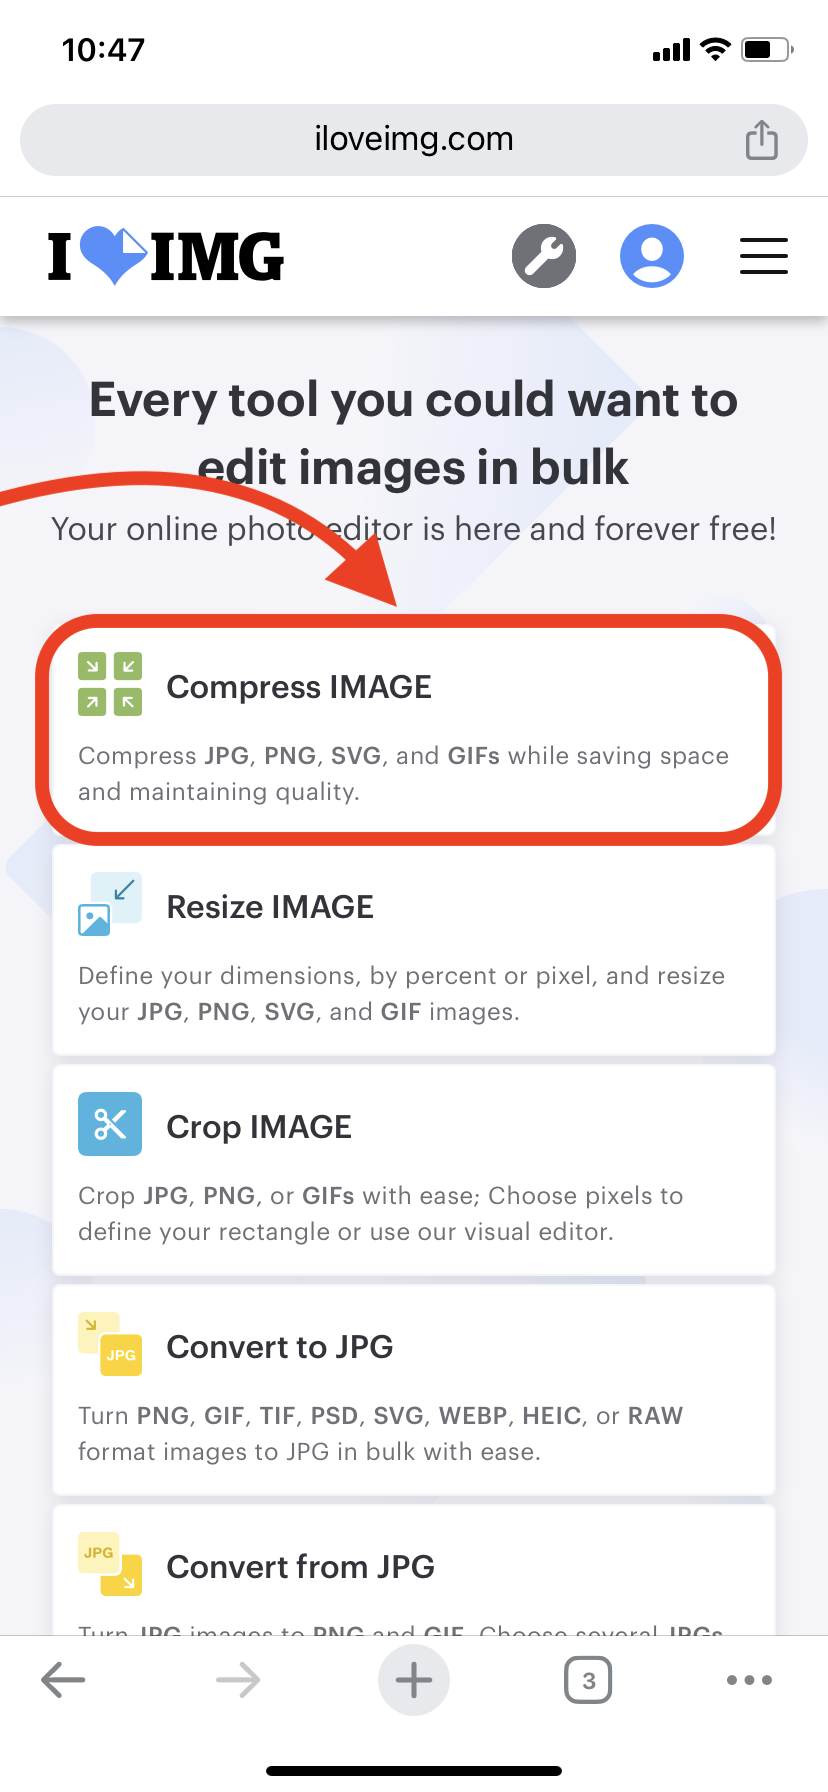 How To Compress Photos Online: Step 1